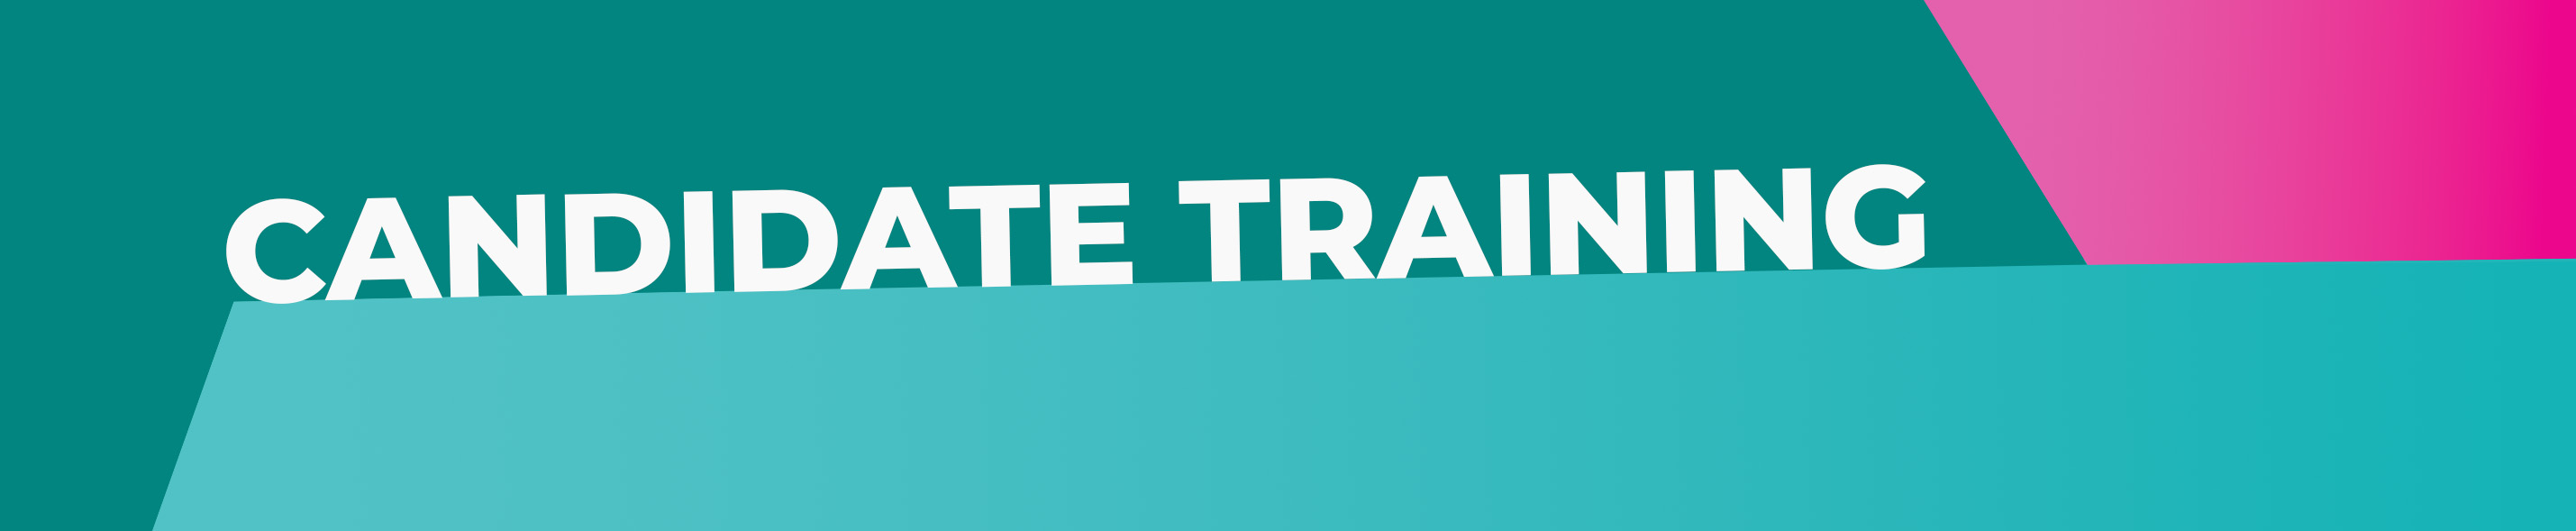 Candidate Training Banner